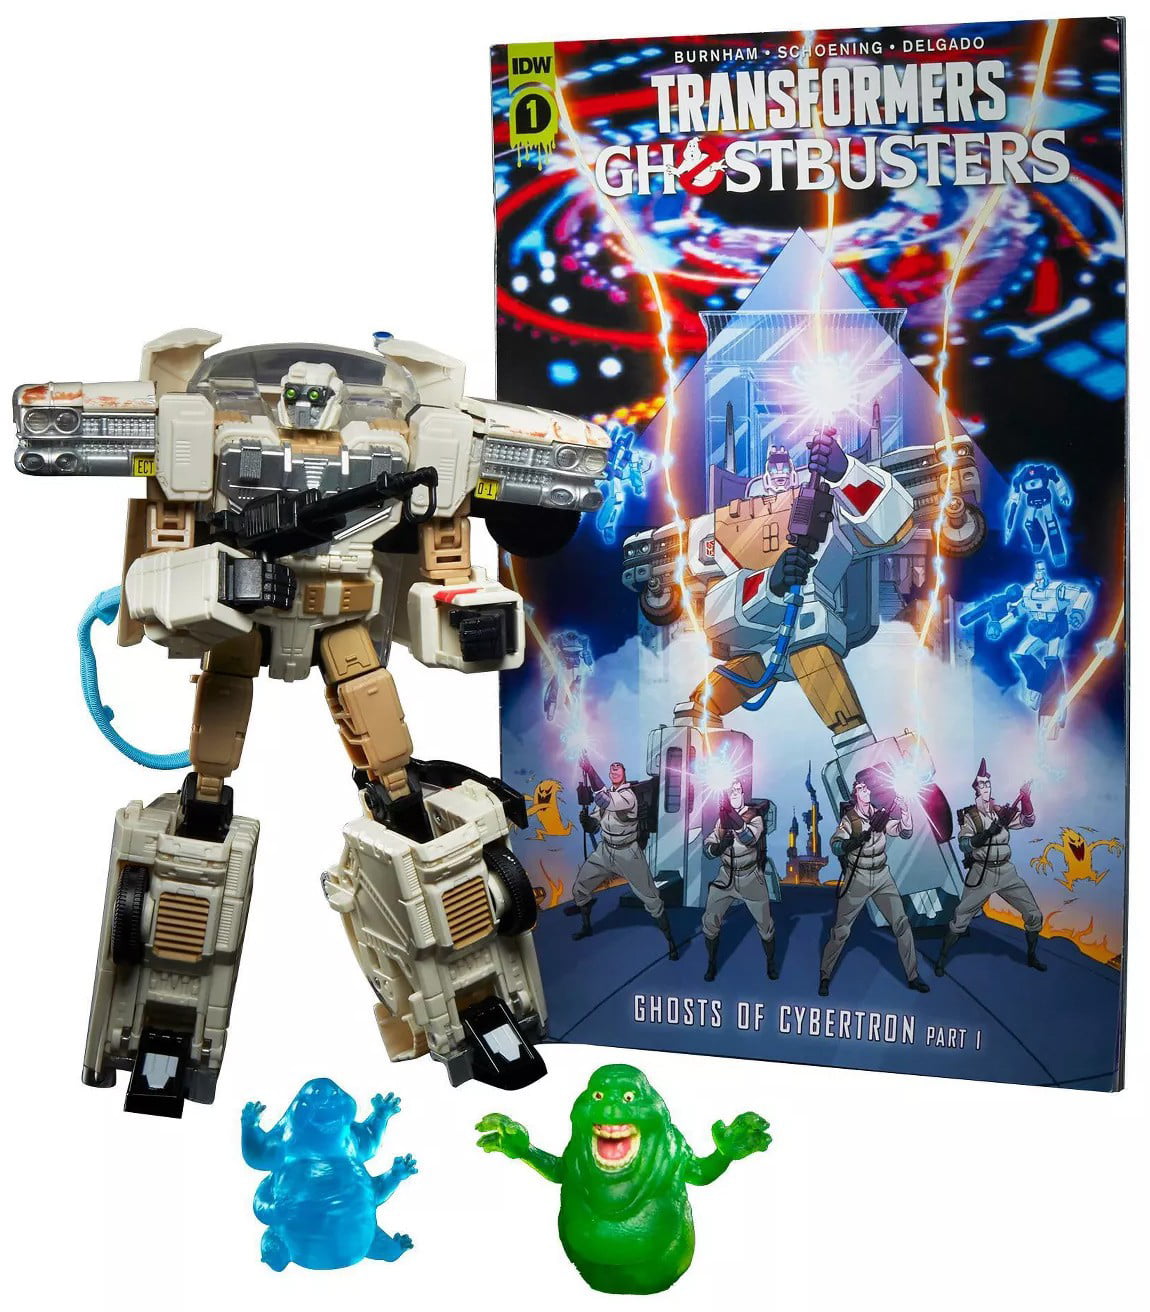 ToysHero New In Hand Transformers Ghostbusters Ectotron Ecto-1 in stock 